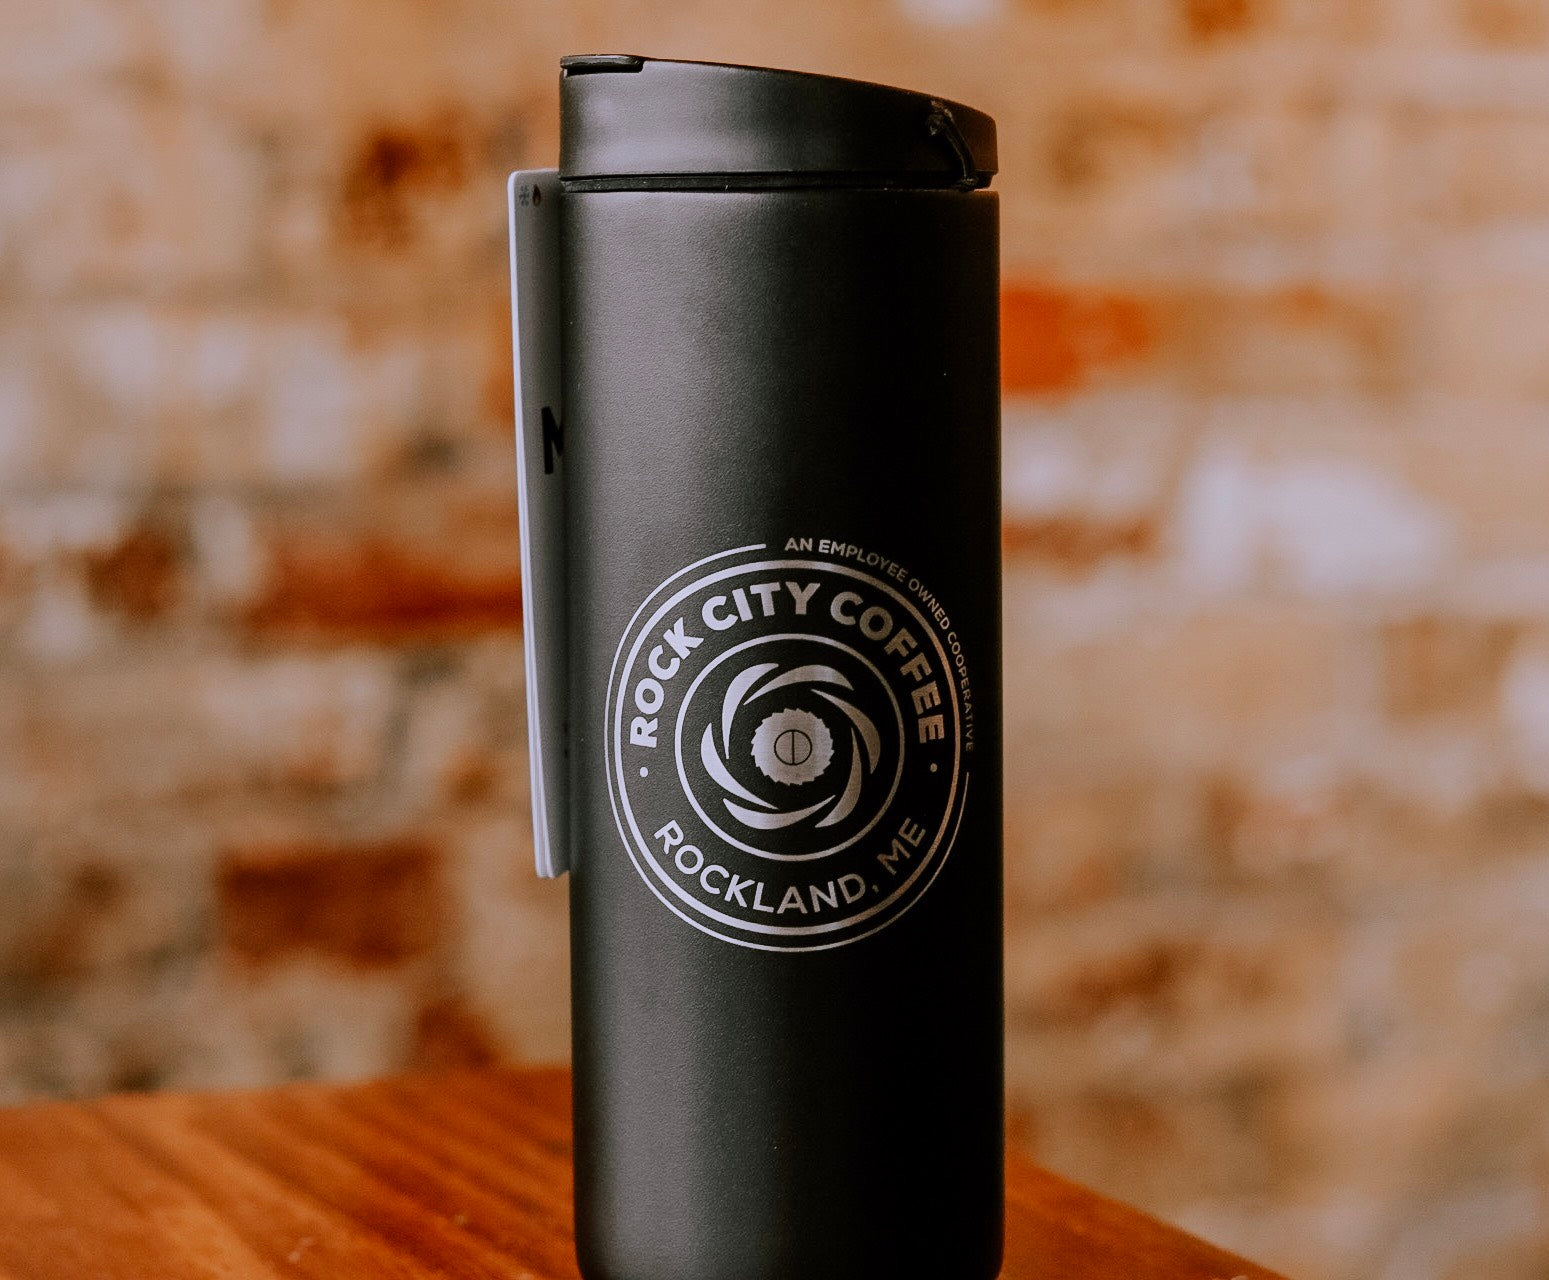 Coffee Traveler & Cambro - To Go! – River City Coffee and Goods